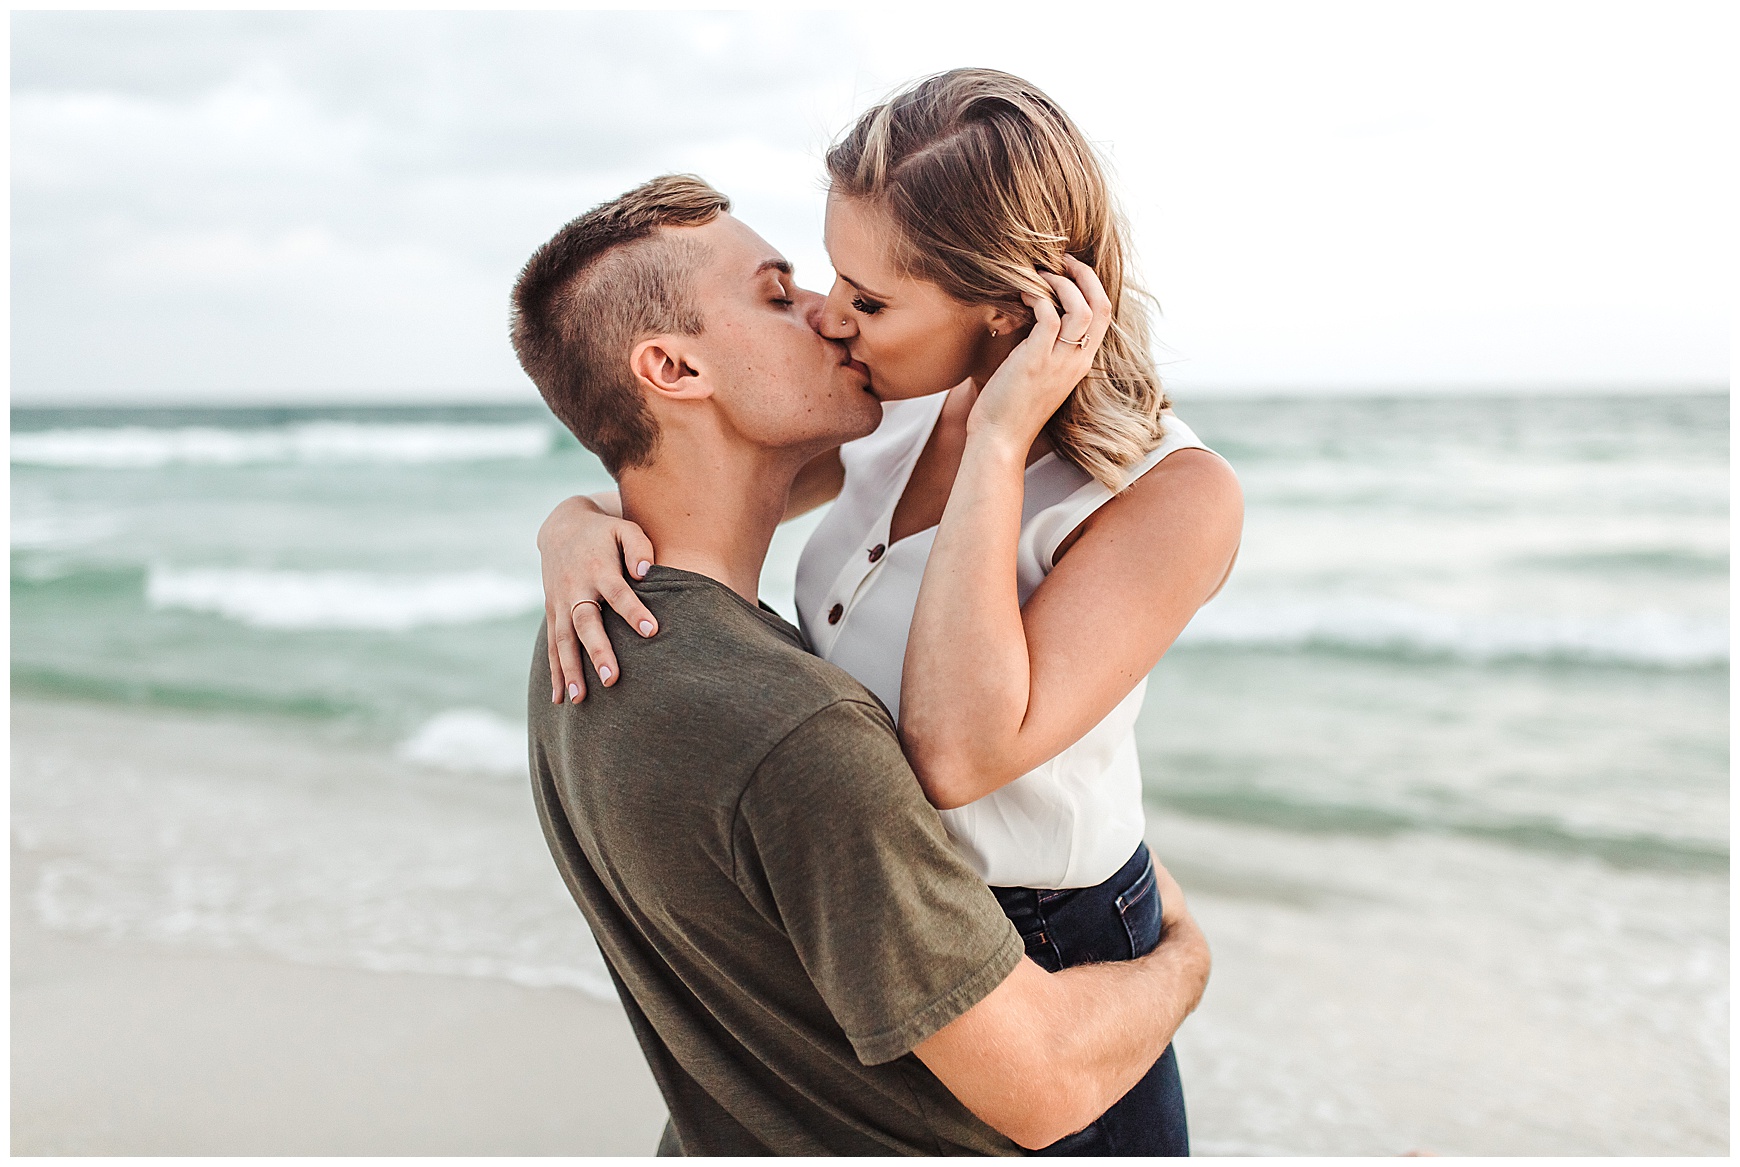 Engagement Session at the beach in South Walton 30a